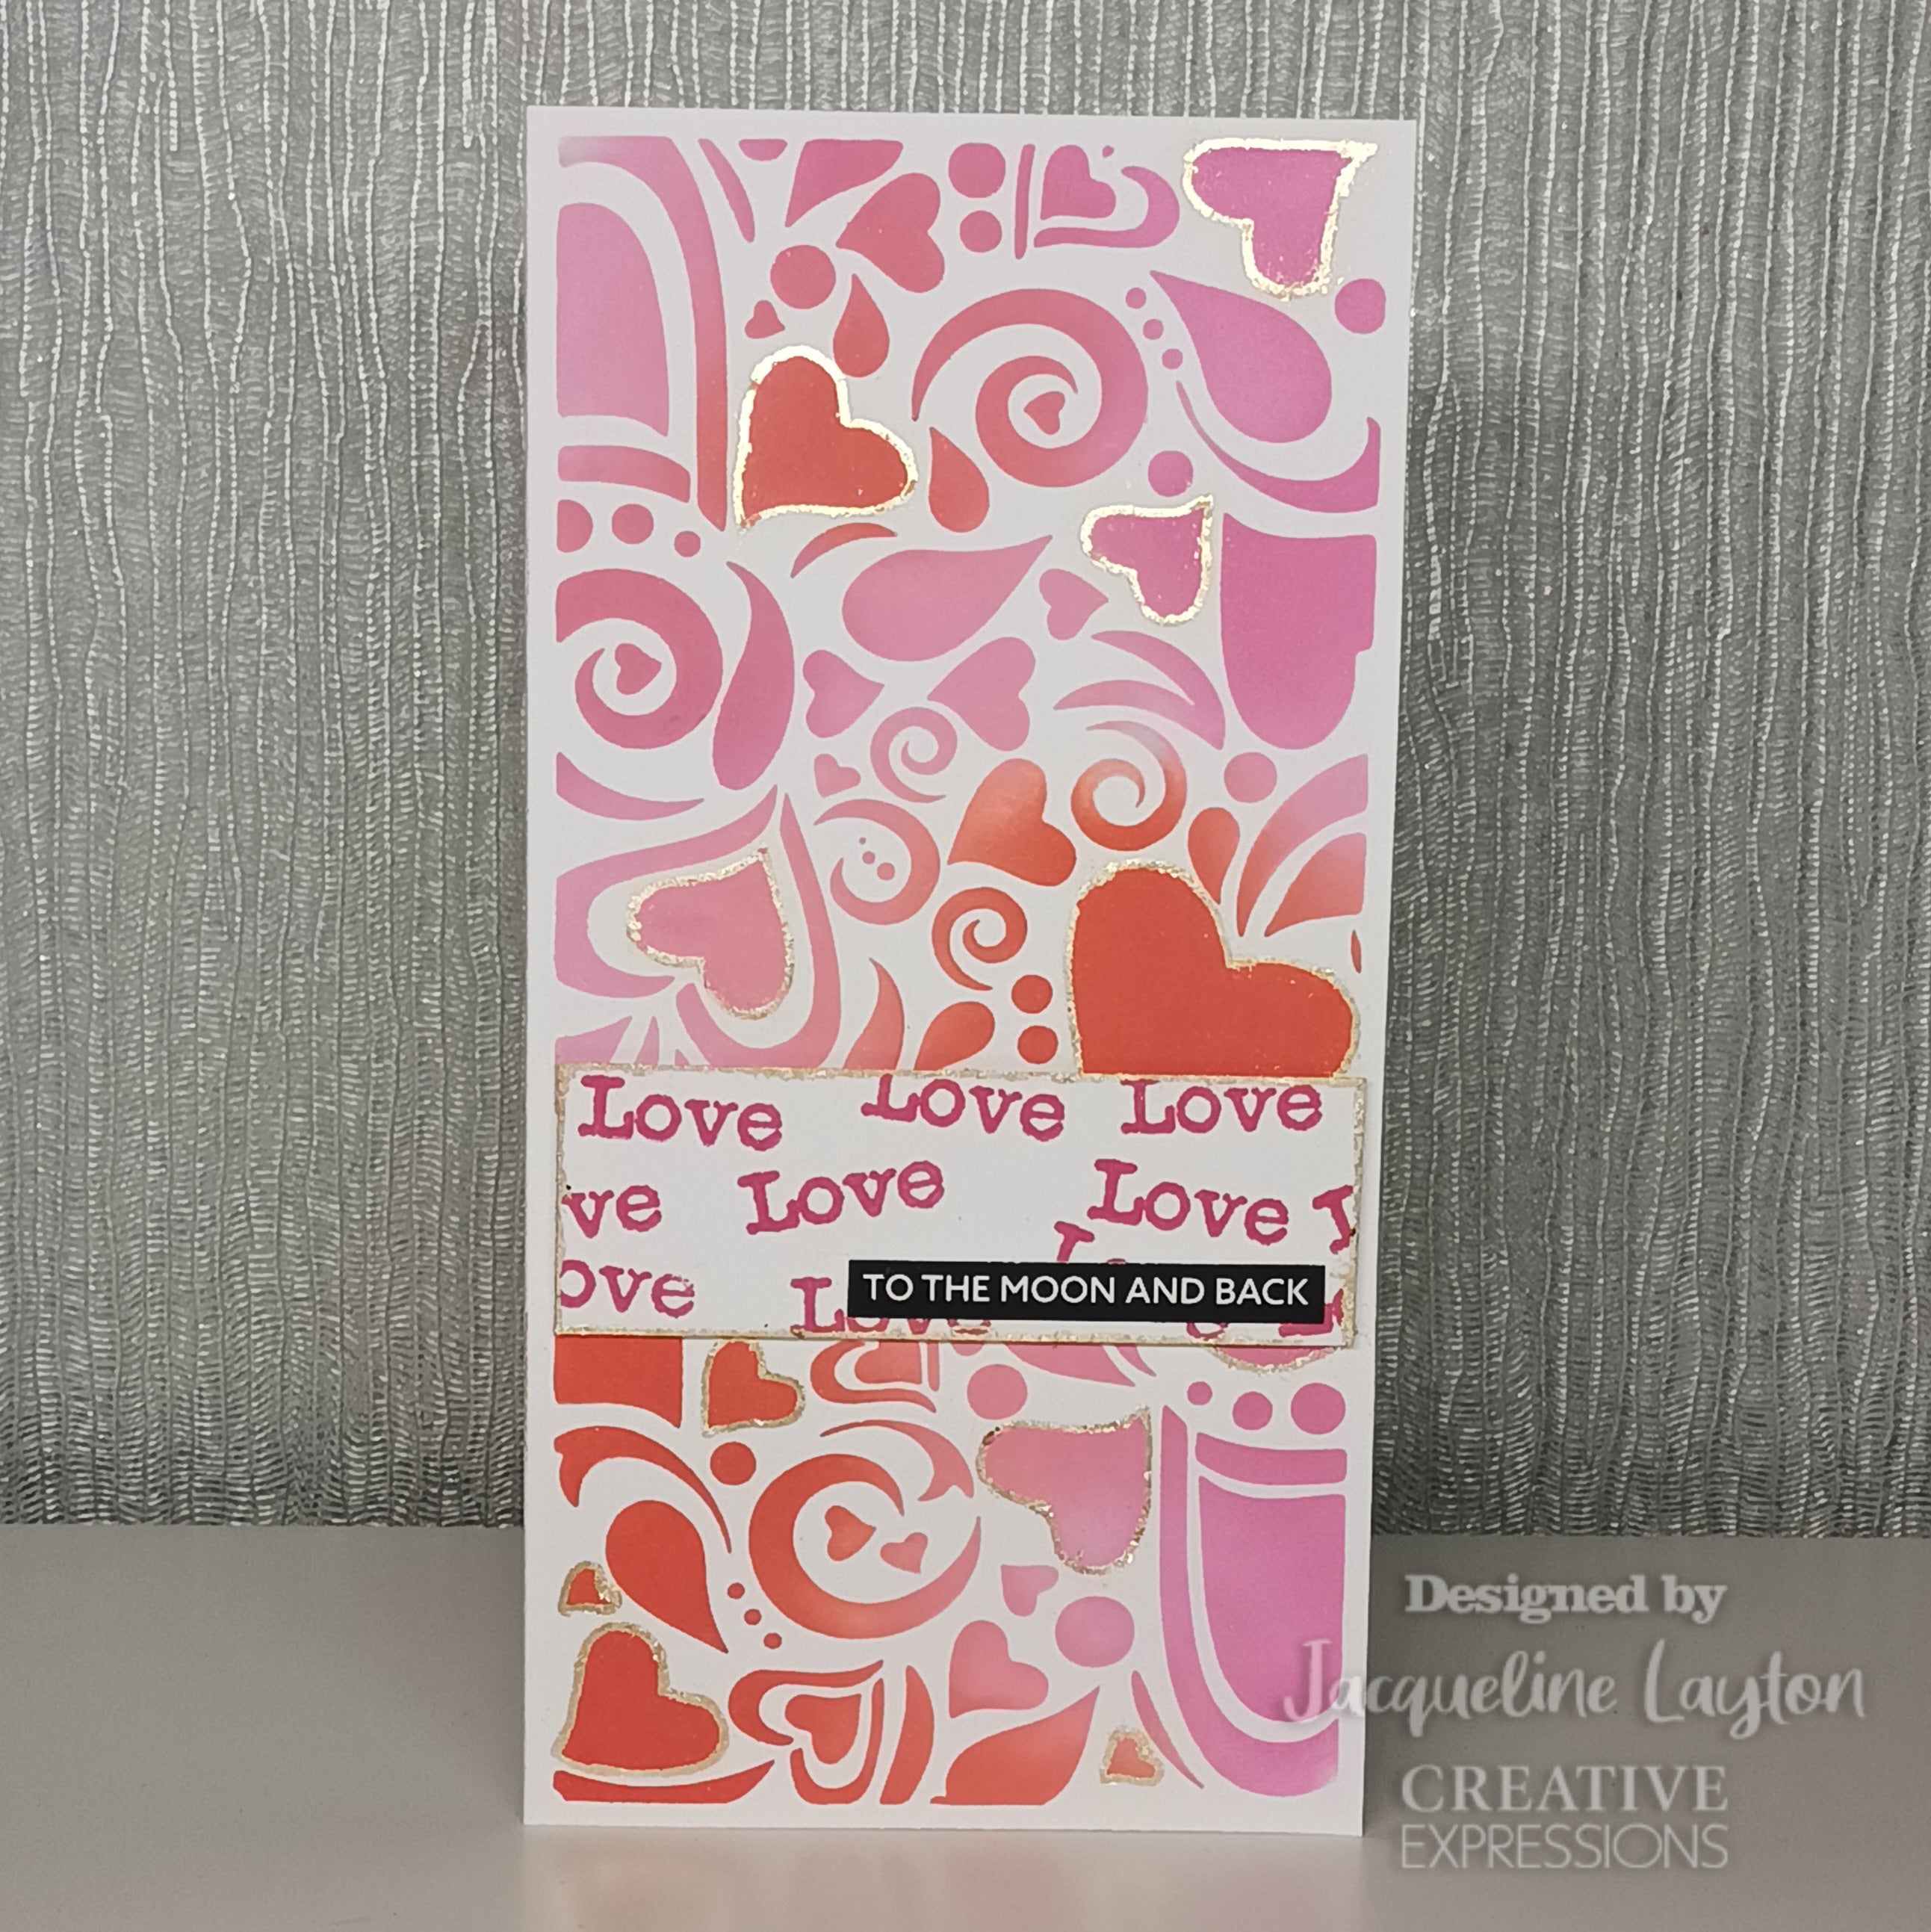 Creative Expressions Wordies Sentiment Sheets - Be My Valentine 4 Pk 6 in x 8 in